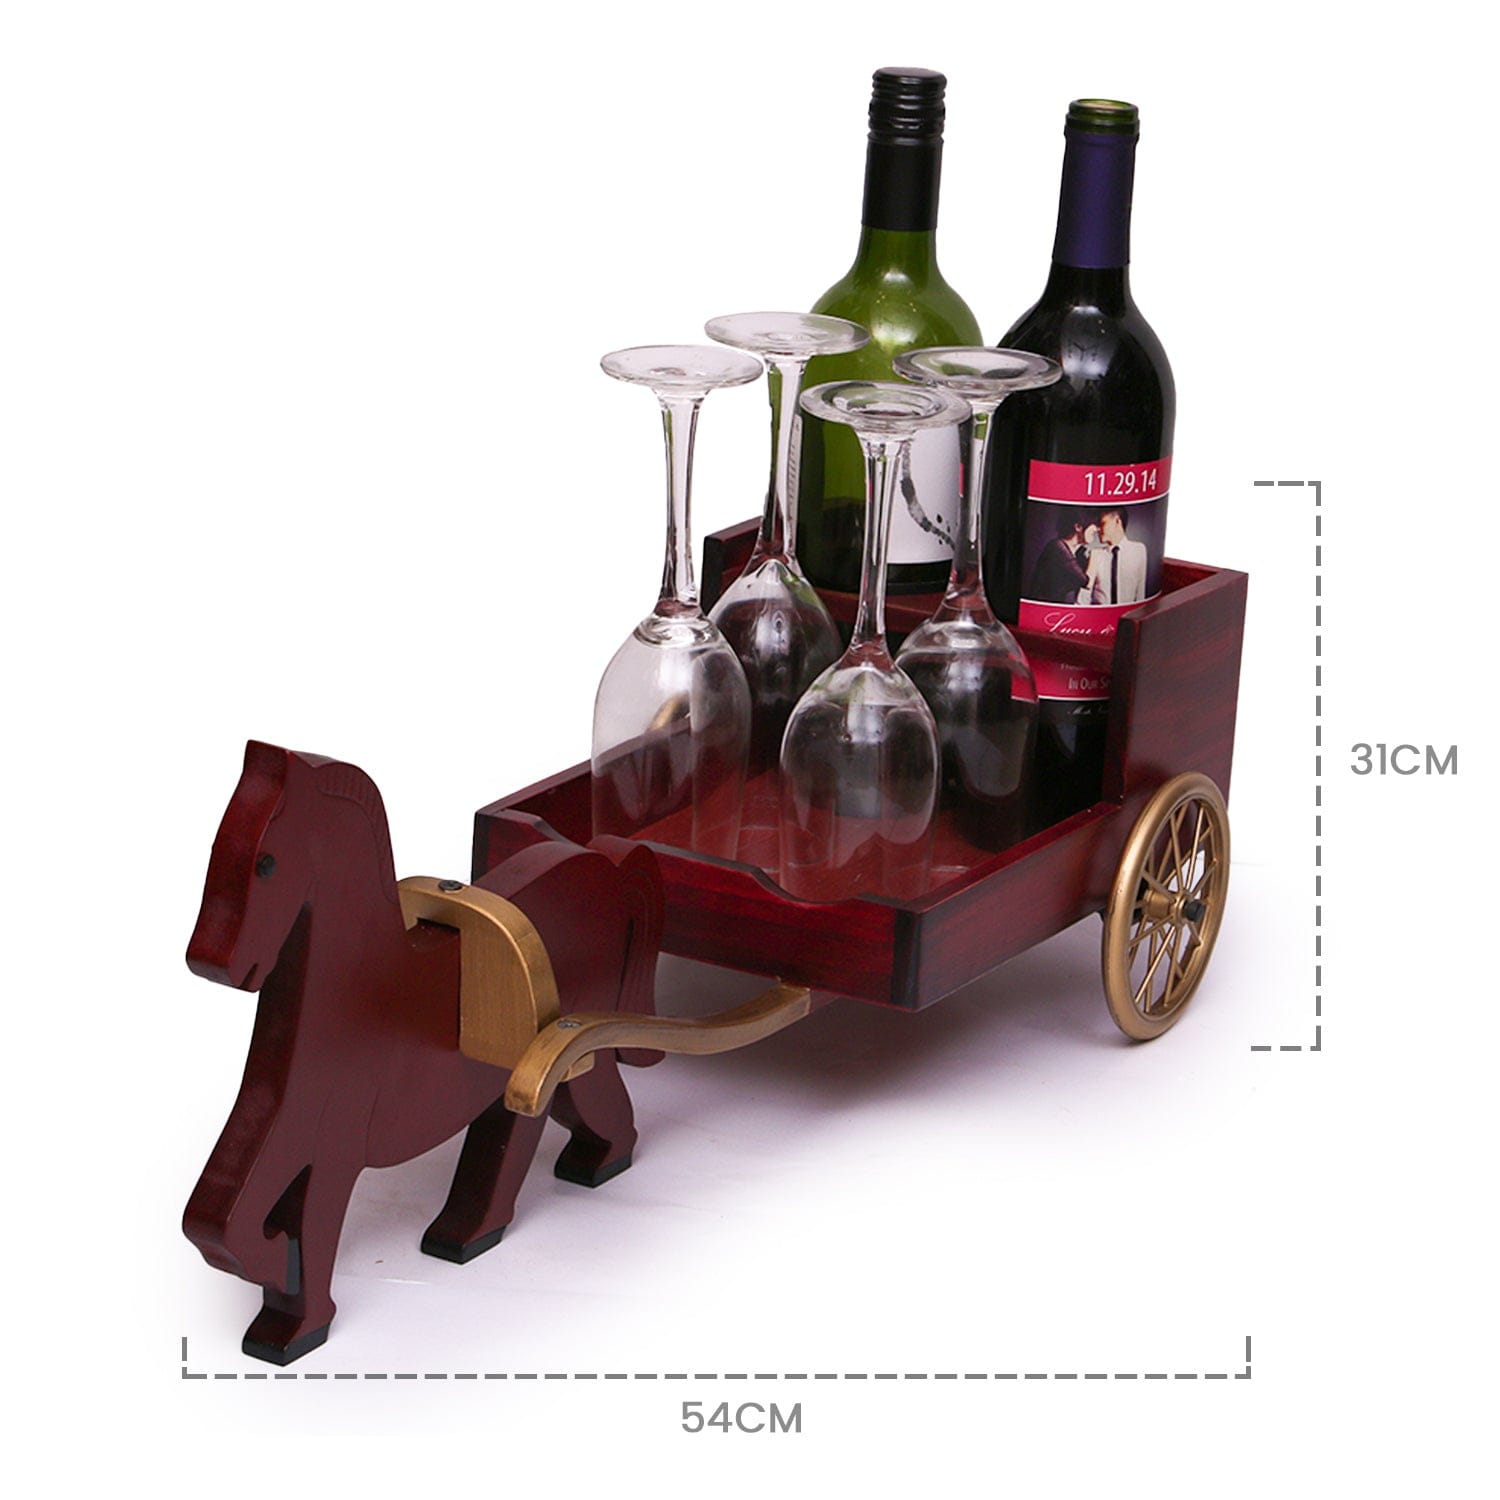 Red Butler Bar decor Wine & Glass Holder WHHC00W22Y18A1 DUHC22A1 Elevate Your Home Bar with Horse Cart Wine & Glass Holder - Modern Decor Redbutler